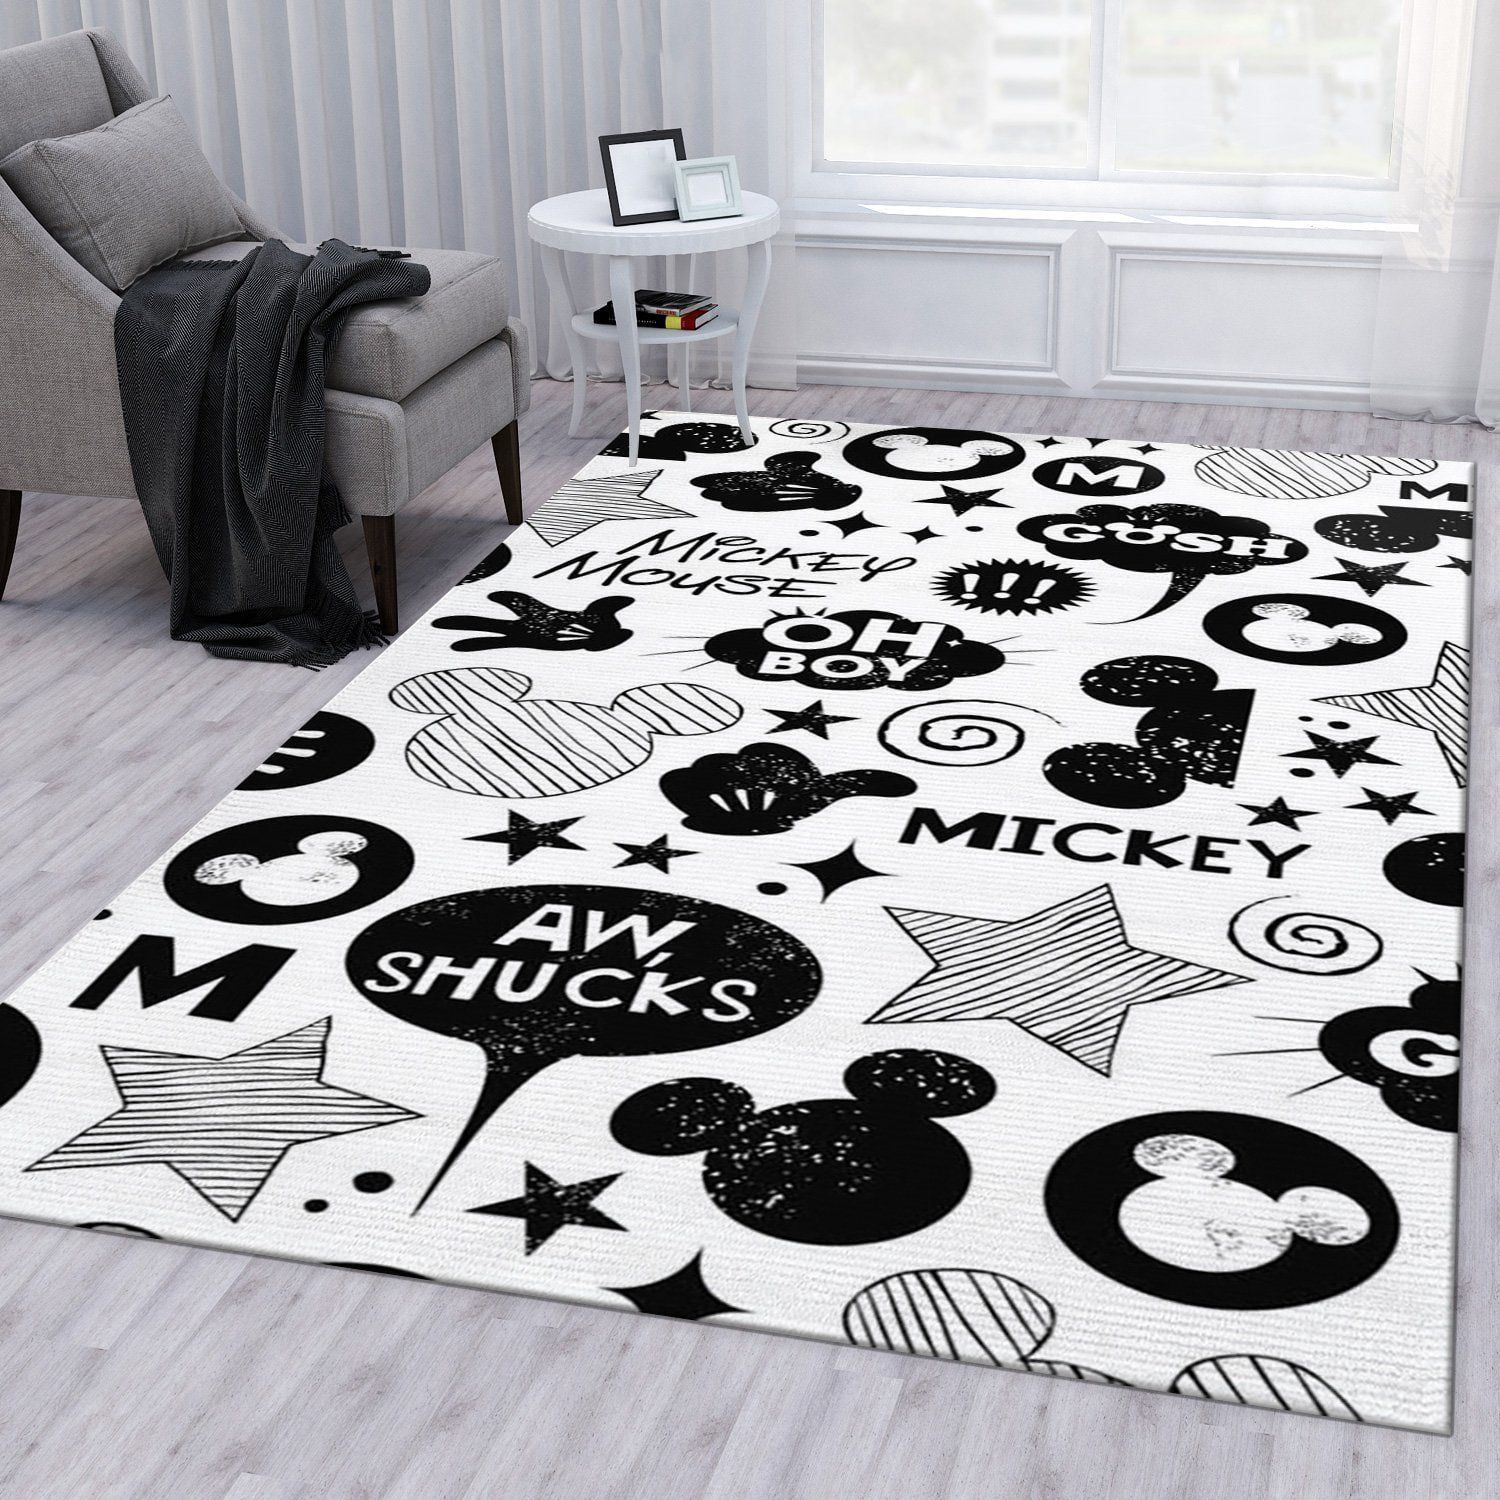 Minnie Mouse Black And White Area Rug For Christmas Living Room Rug Family Gift US Decor - Indoor Outdoor Rugs